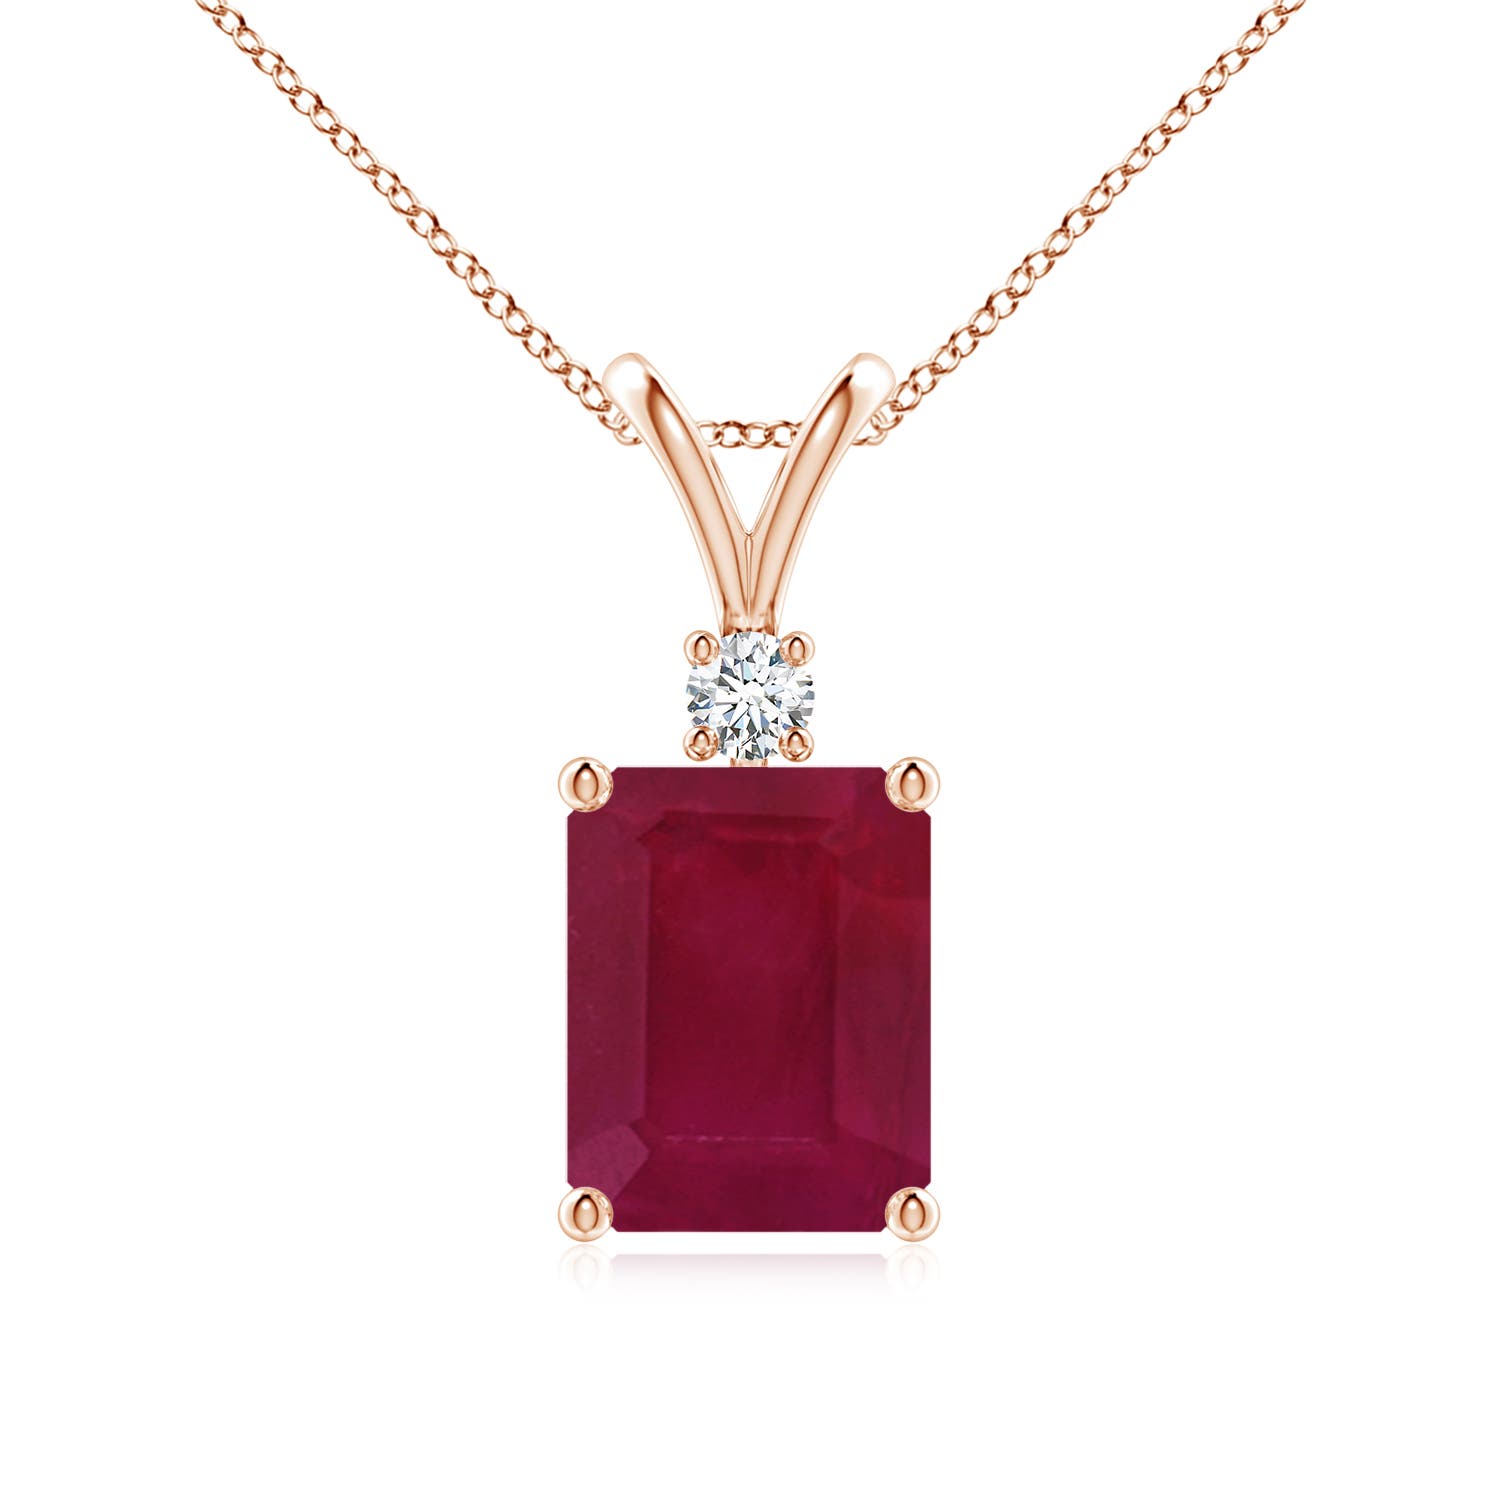 A - Ruby / 3.07 CT / 14 KT Rose Gold